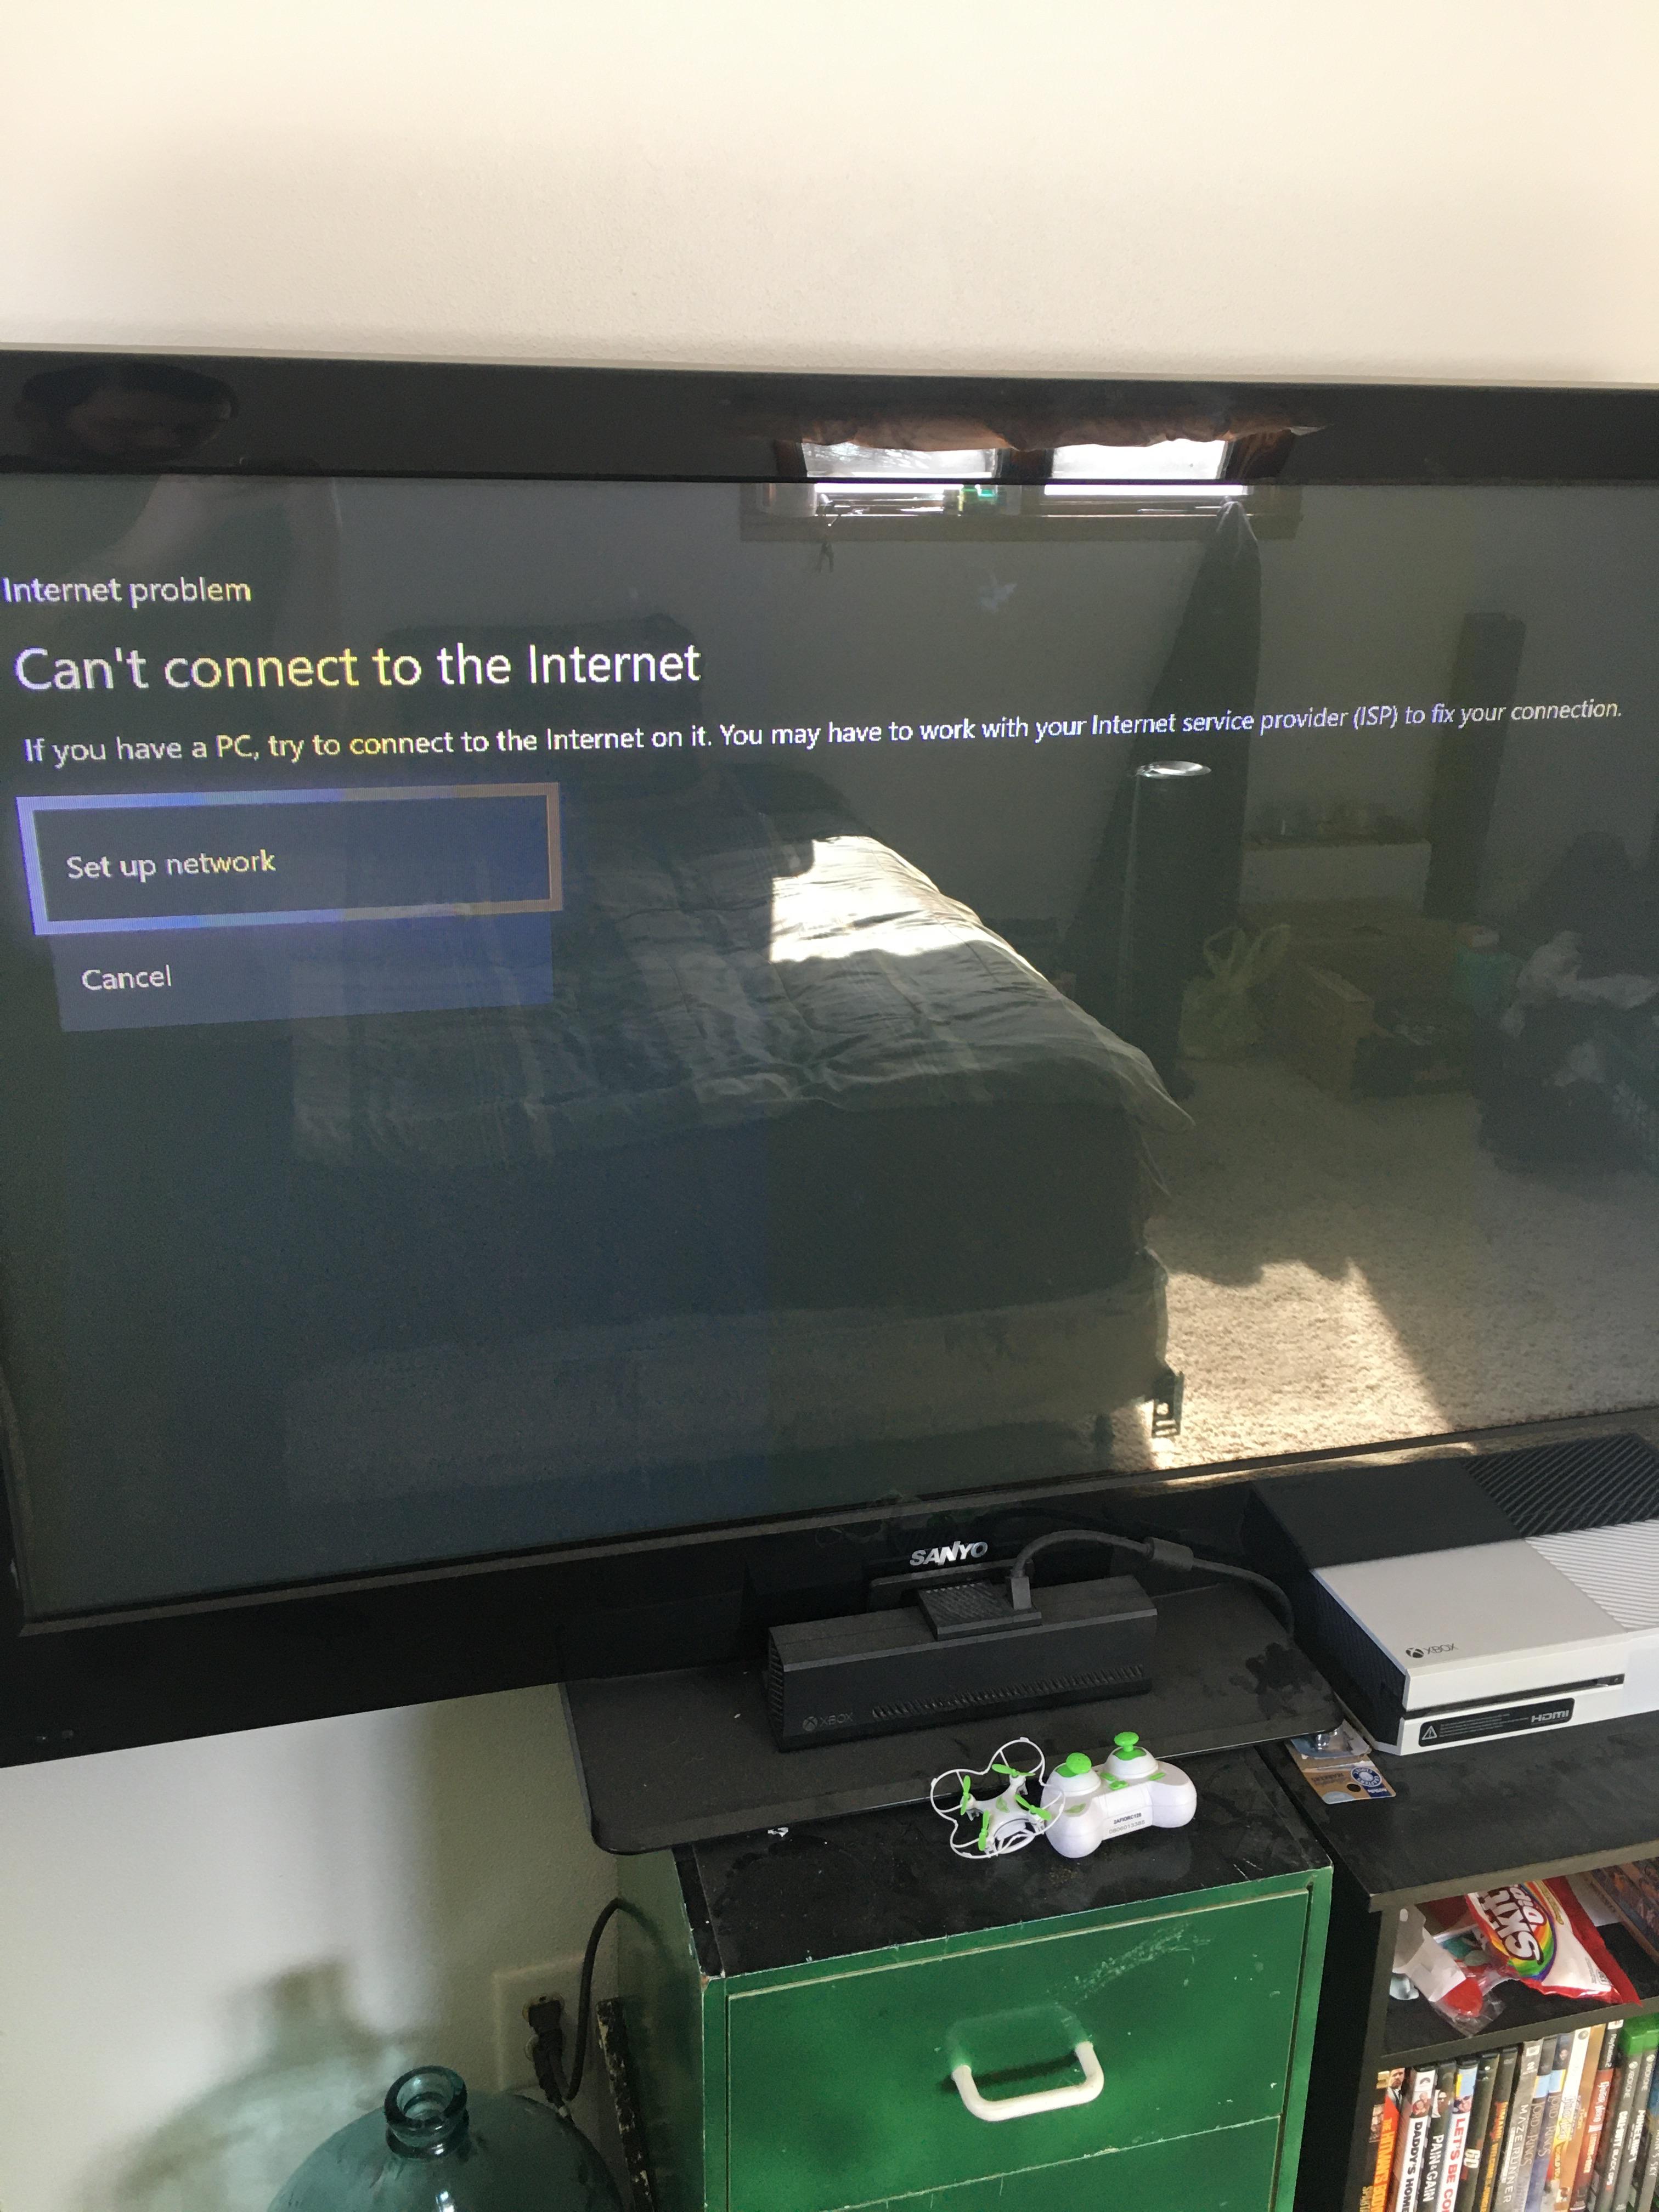 Ensure that your Xbox One is connected to the internet.
Check if other devices on your network are able to connect to the internet.